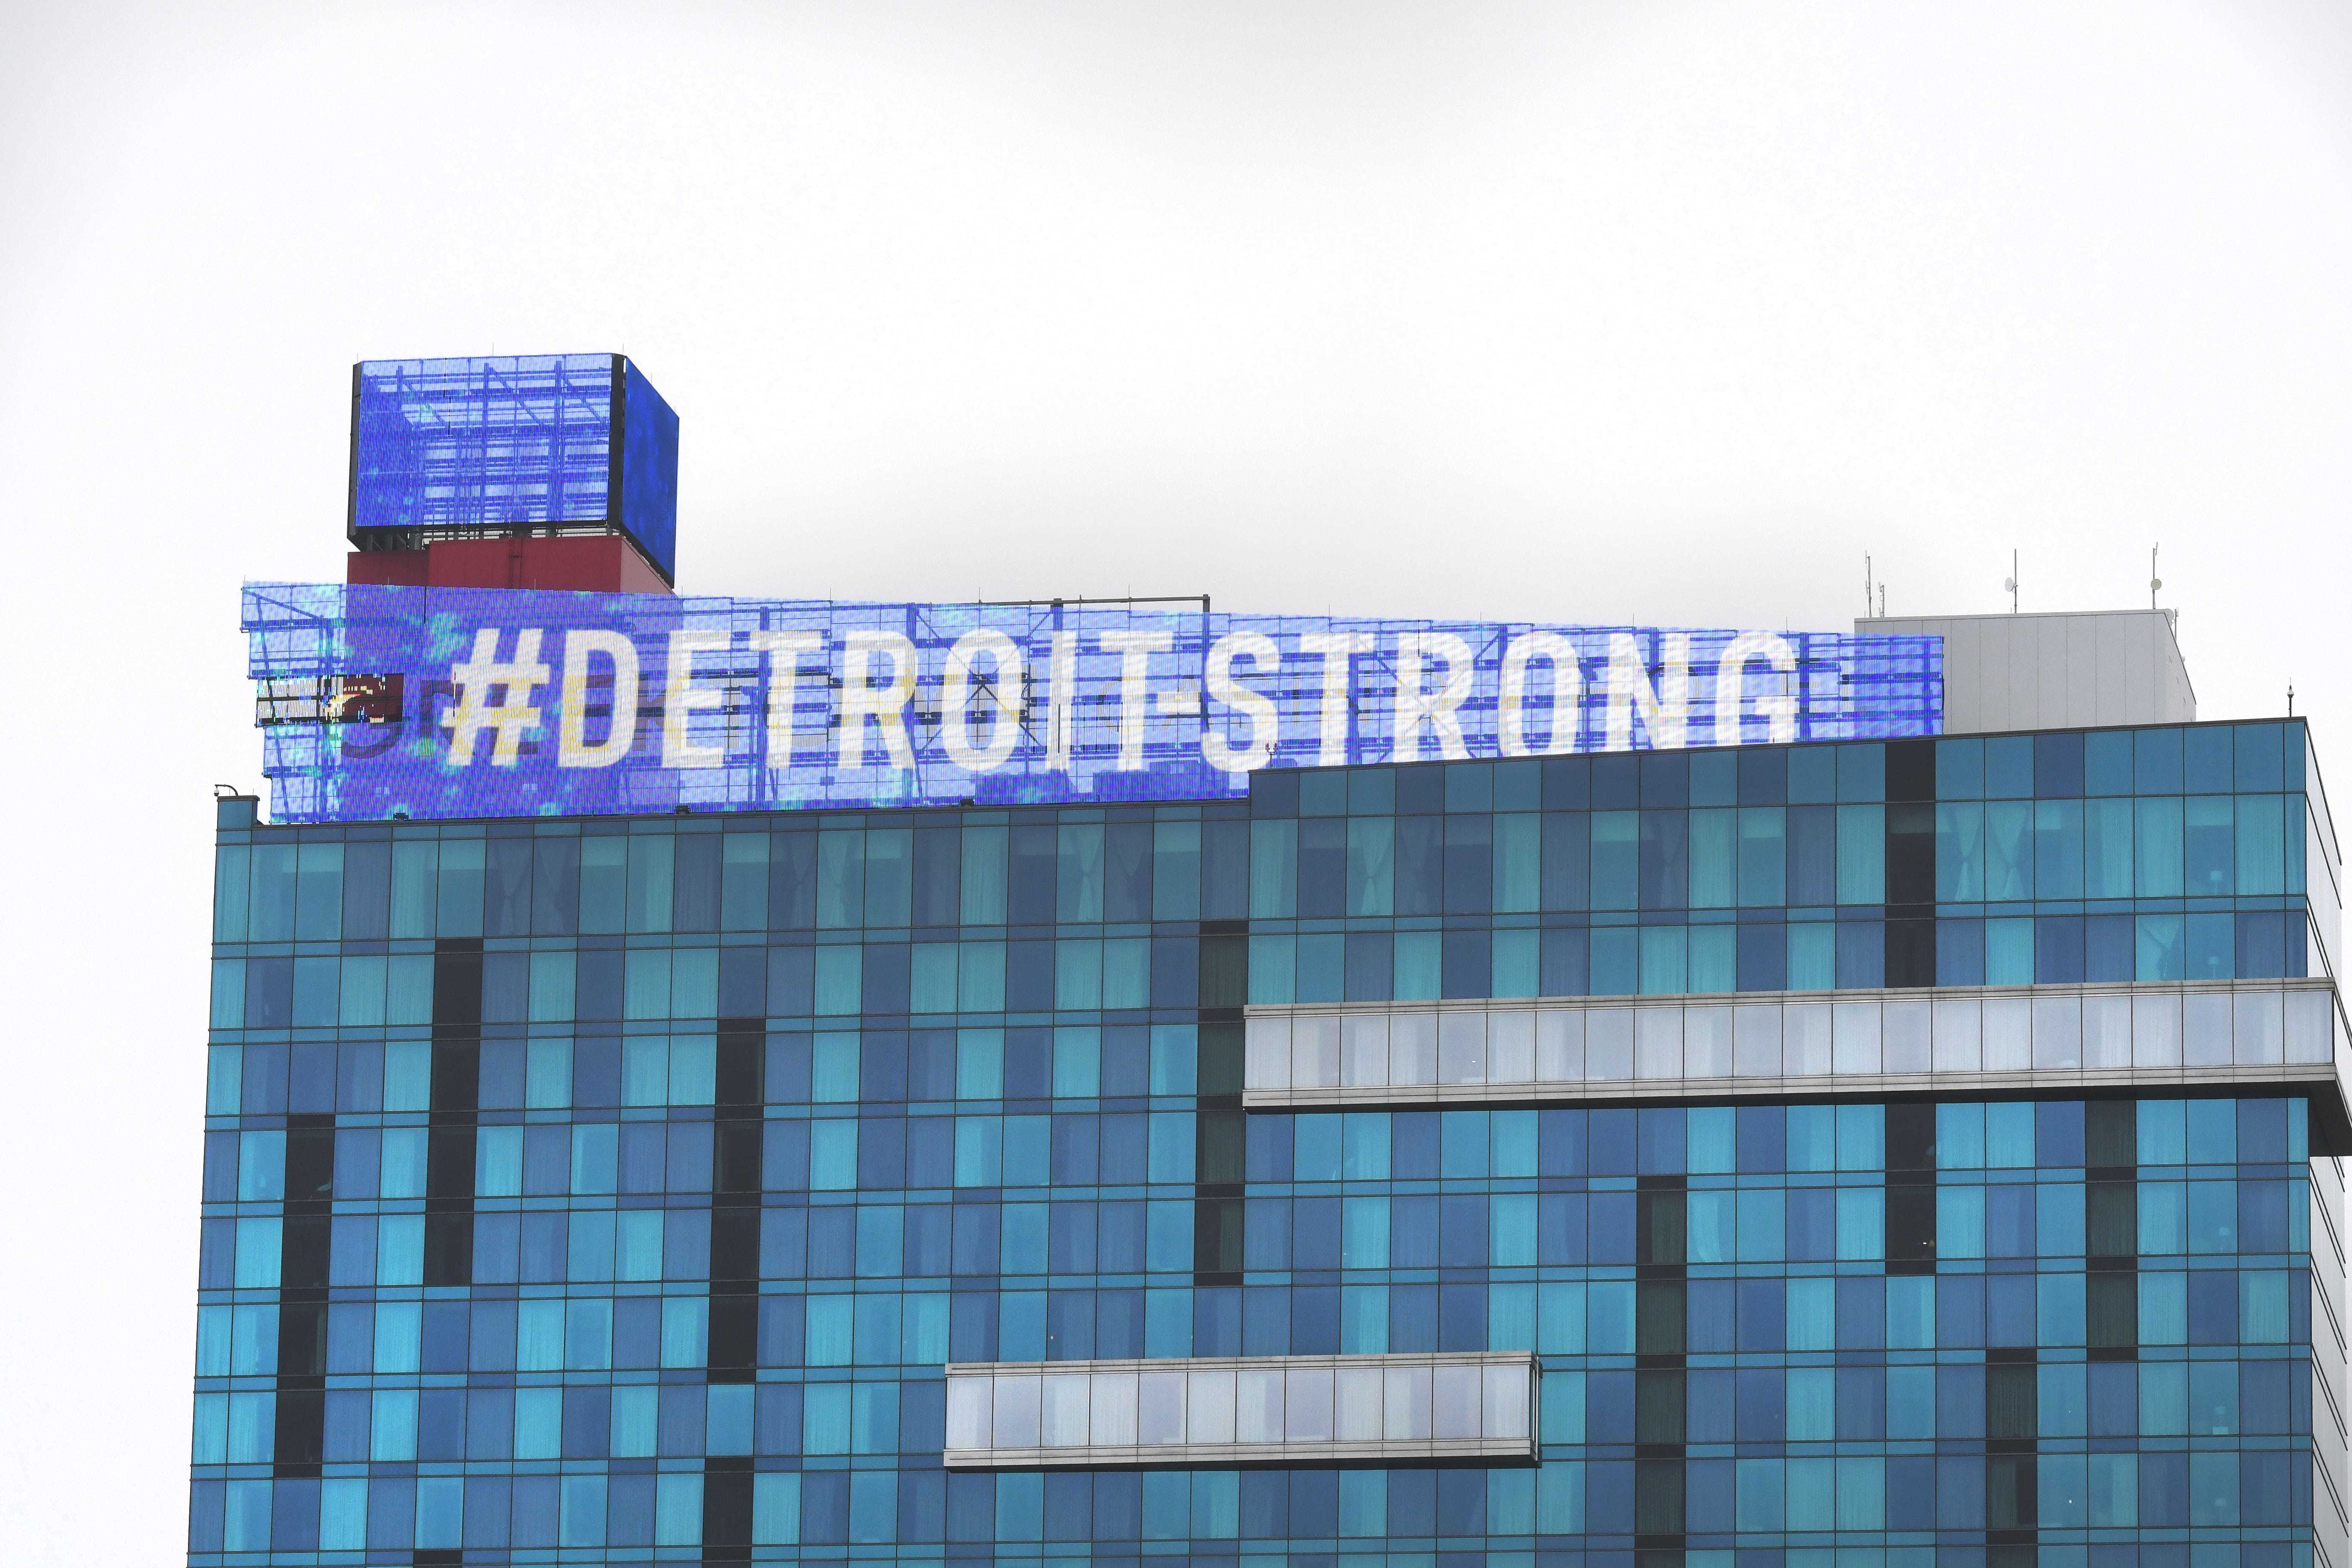 The Greektown Casino shows support and displays Detroit Strong atop its hotel as the battle against COVID-19 continues in Detroit on Tuesday, March 31, 2020